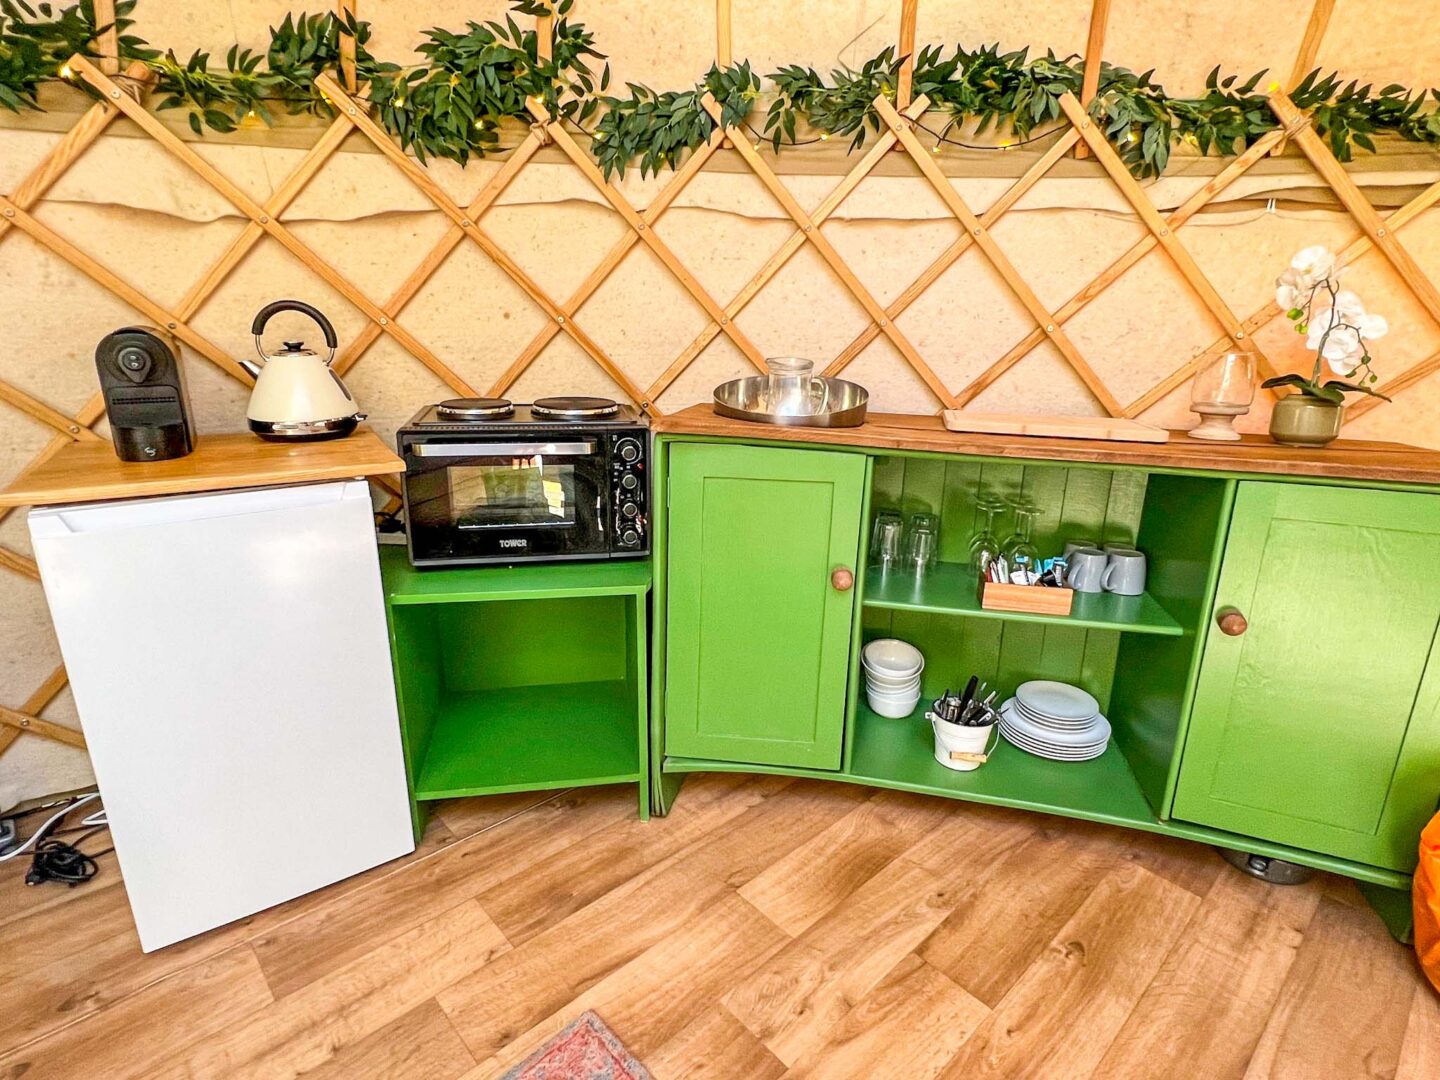 The Wandering Quinn Travel Blog Glamping in Yorkshire, kitchen inside Yurt at Yurtshire